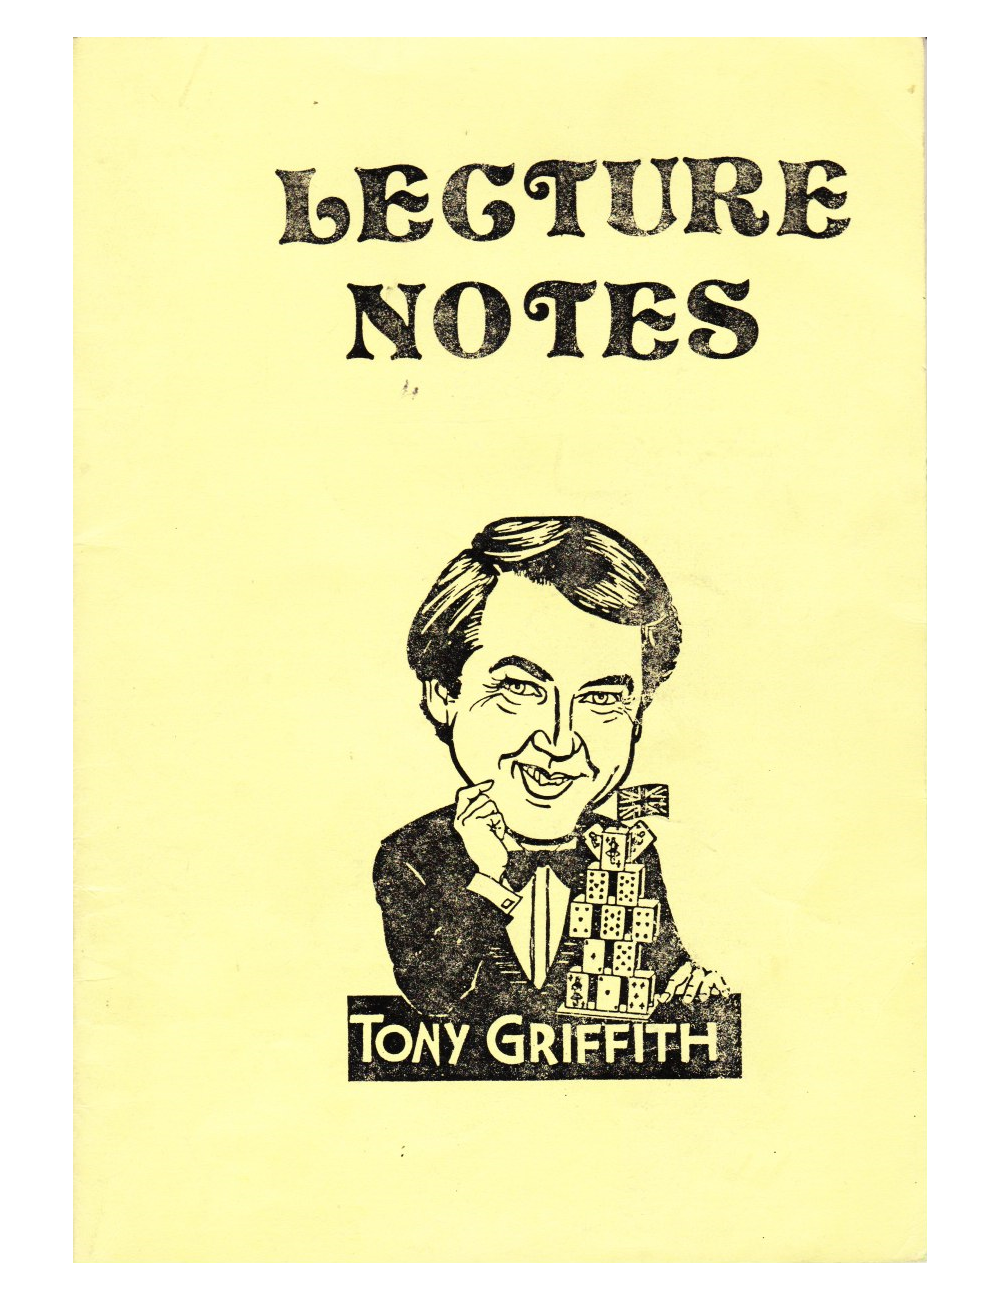 LECTURE NOTES TONY GRIFFITH